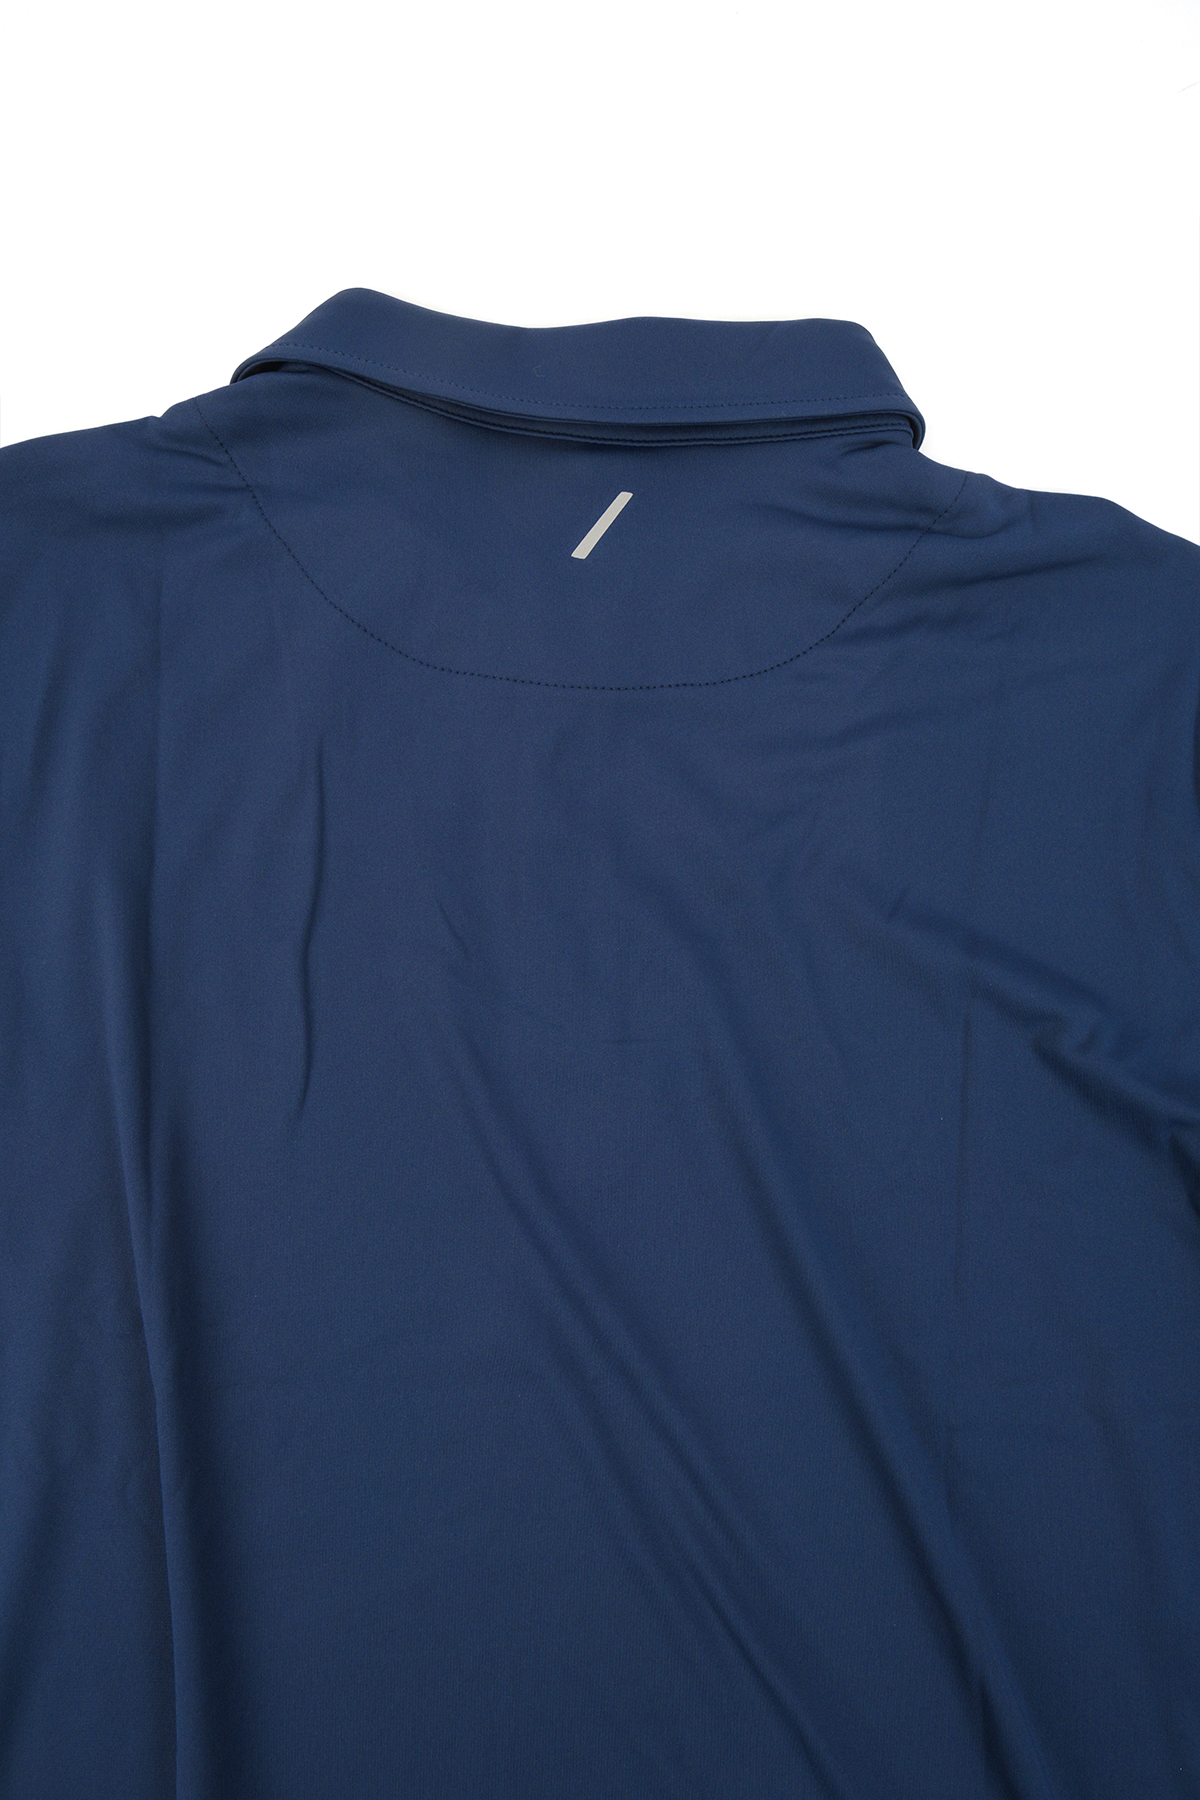 Close up photo showing the backside of the navy golf polo on a white background.